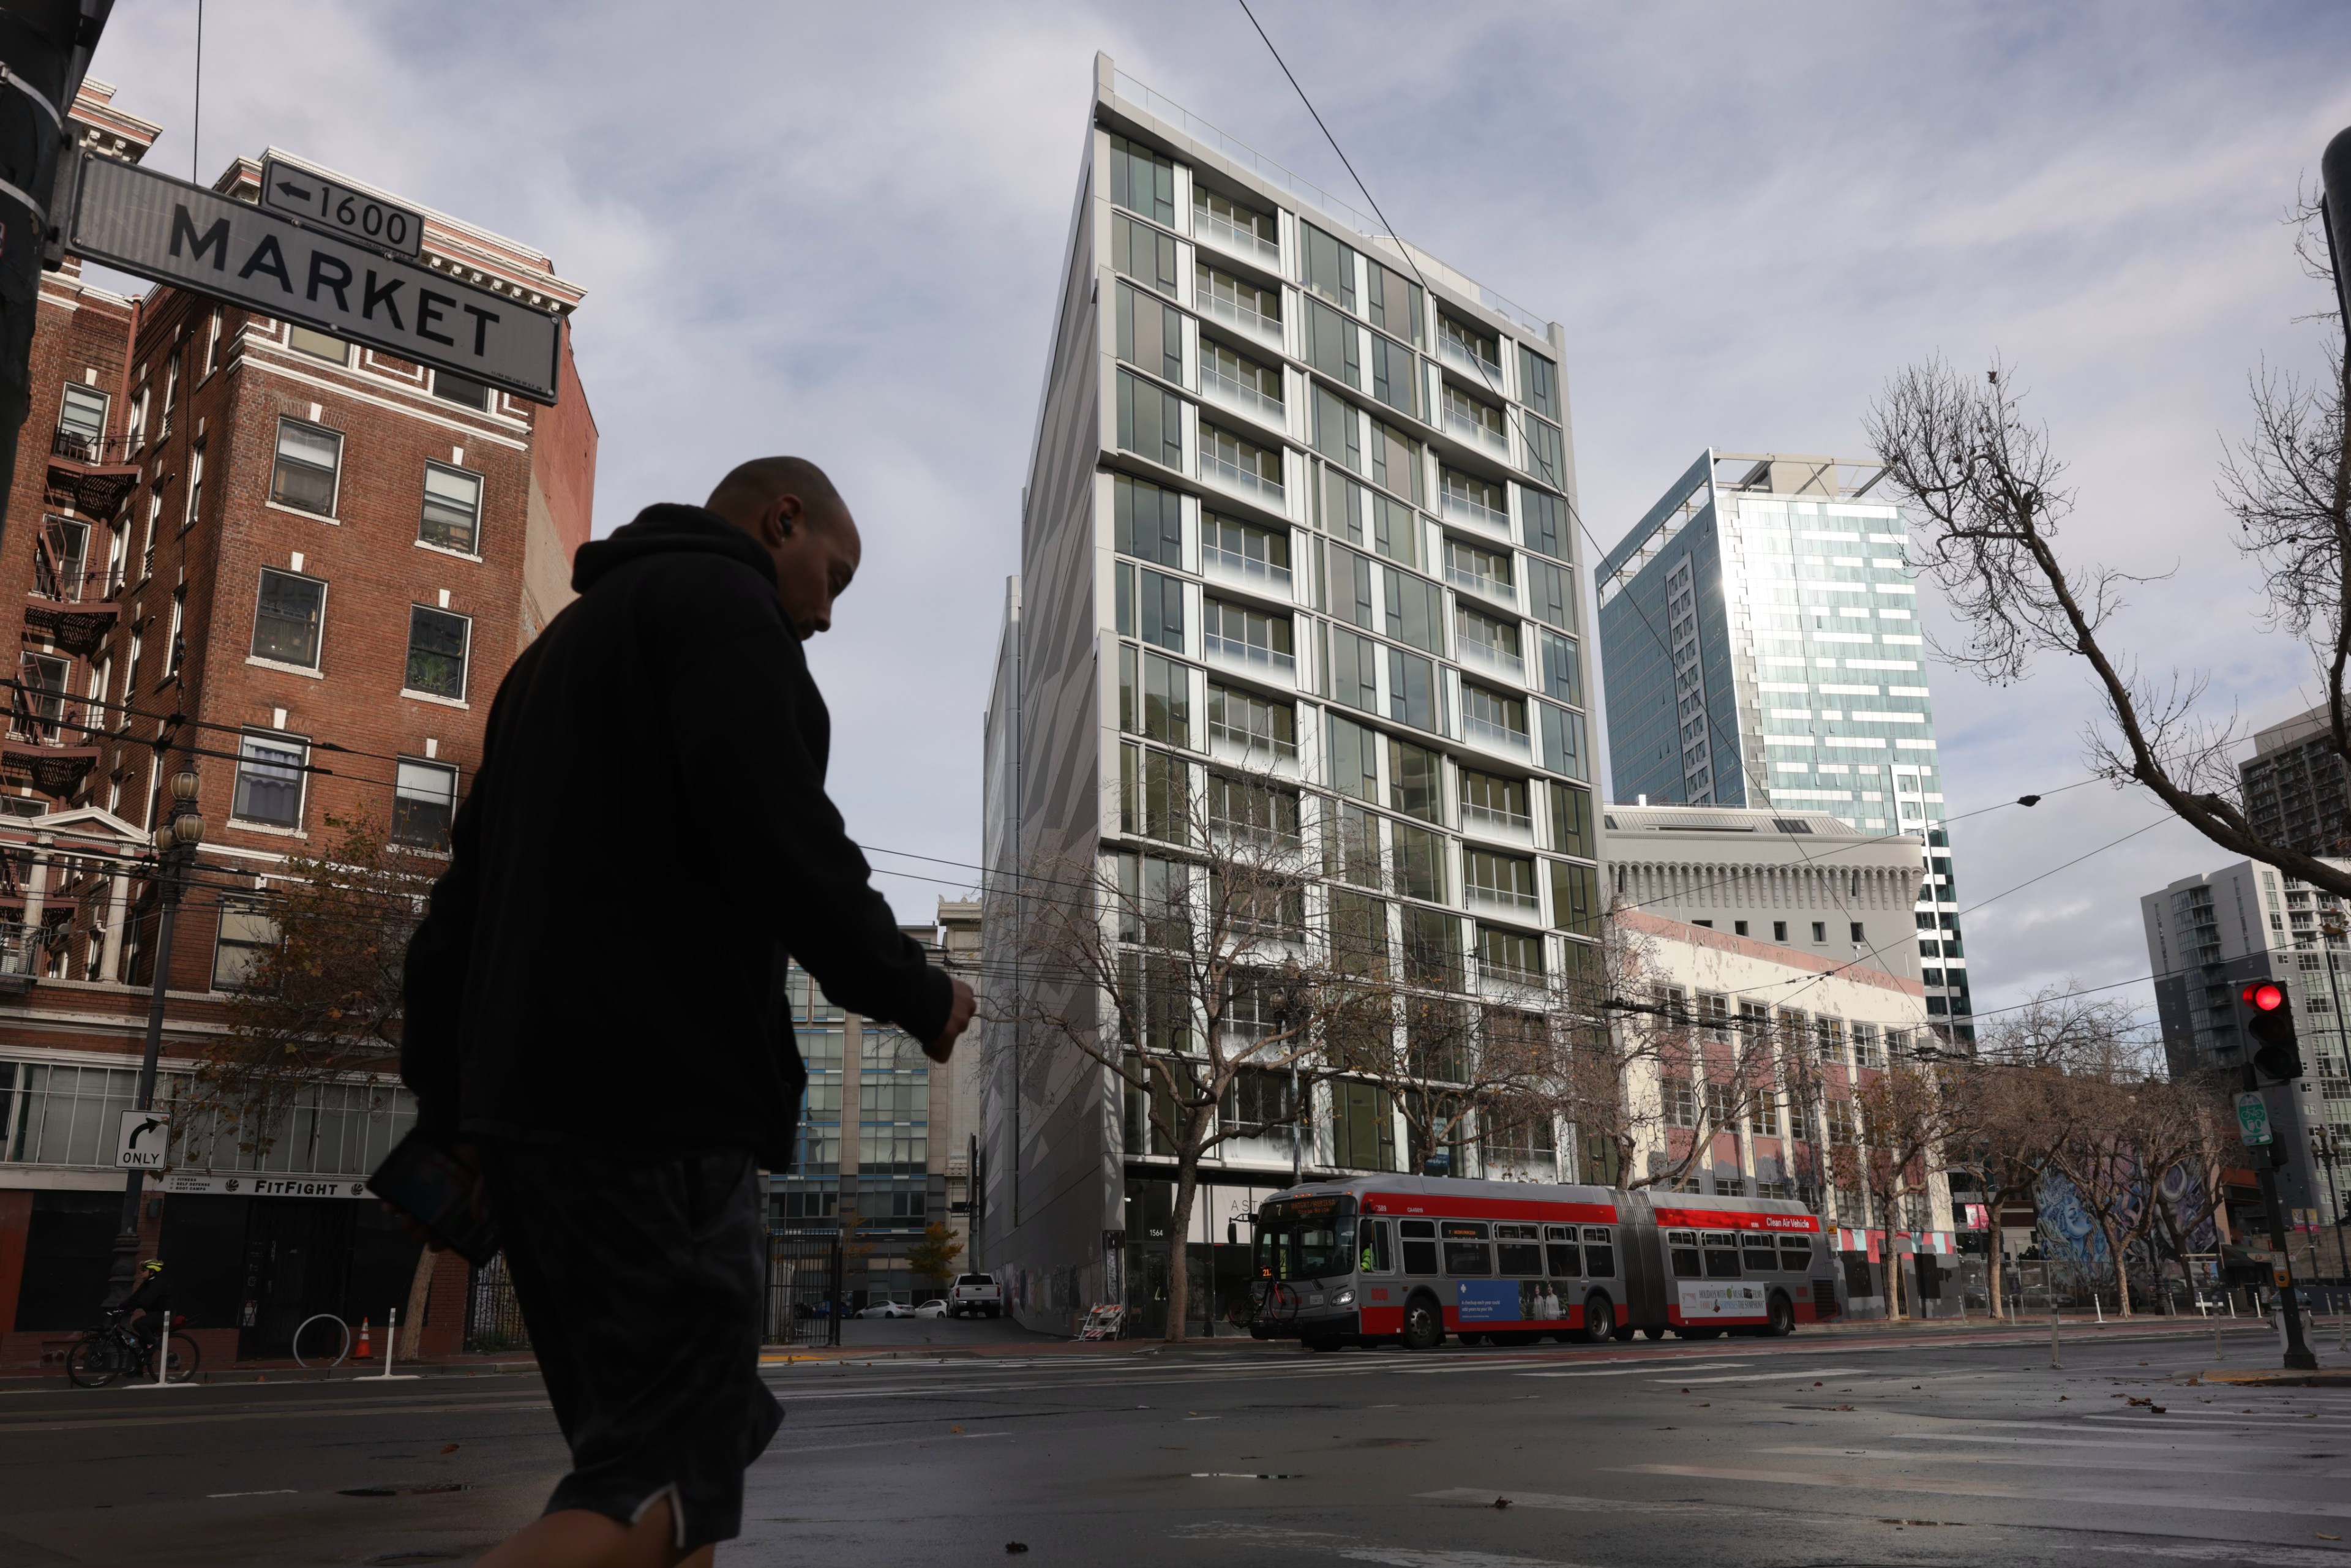 A person walks past a condo building on Market Street.